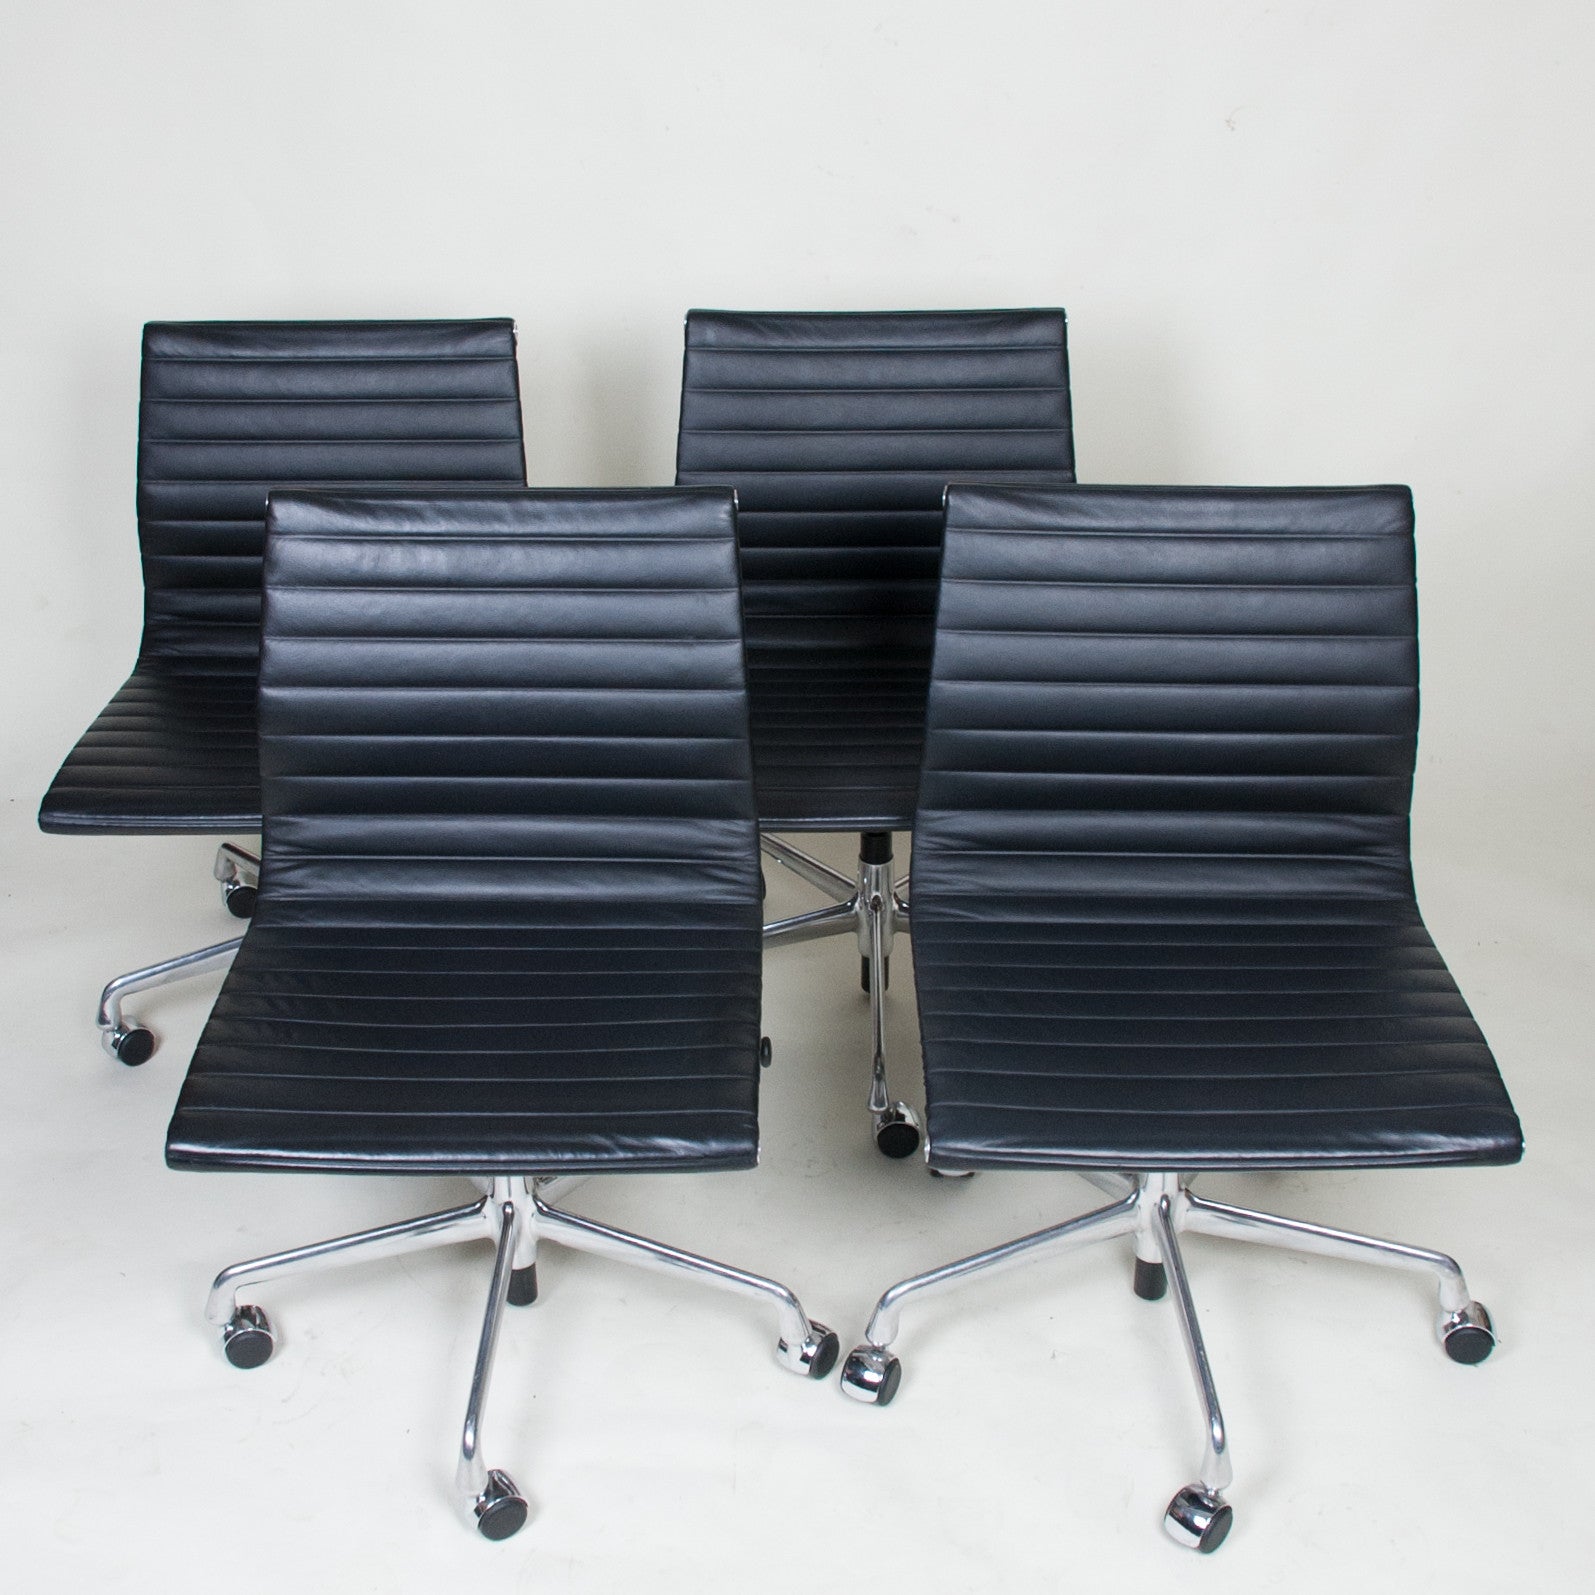 SOLD Eames Herman Miller Low Back Aluminum Group Chairs 4 Available